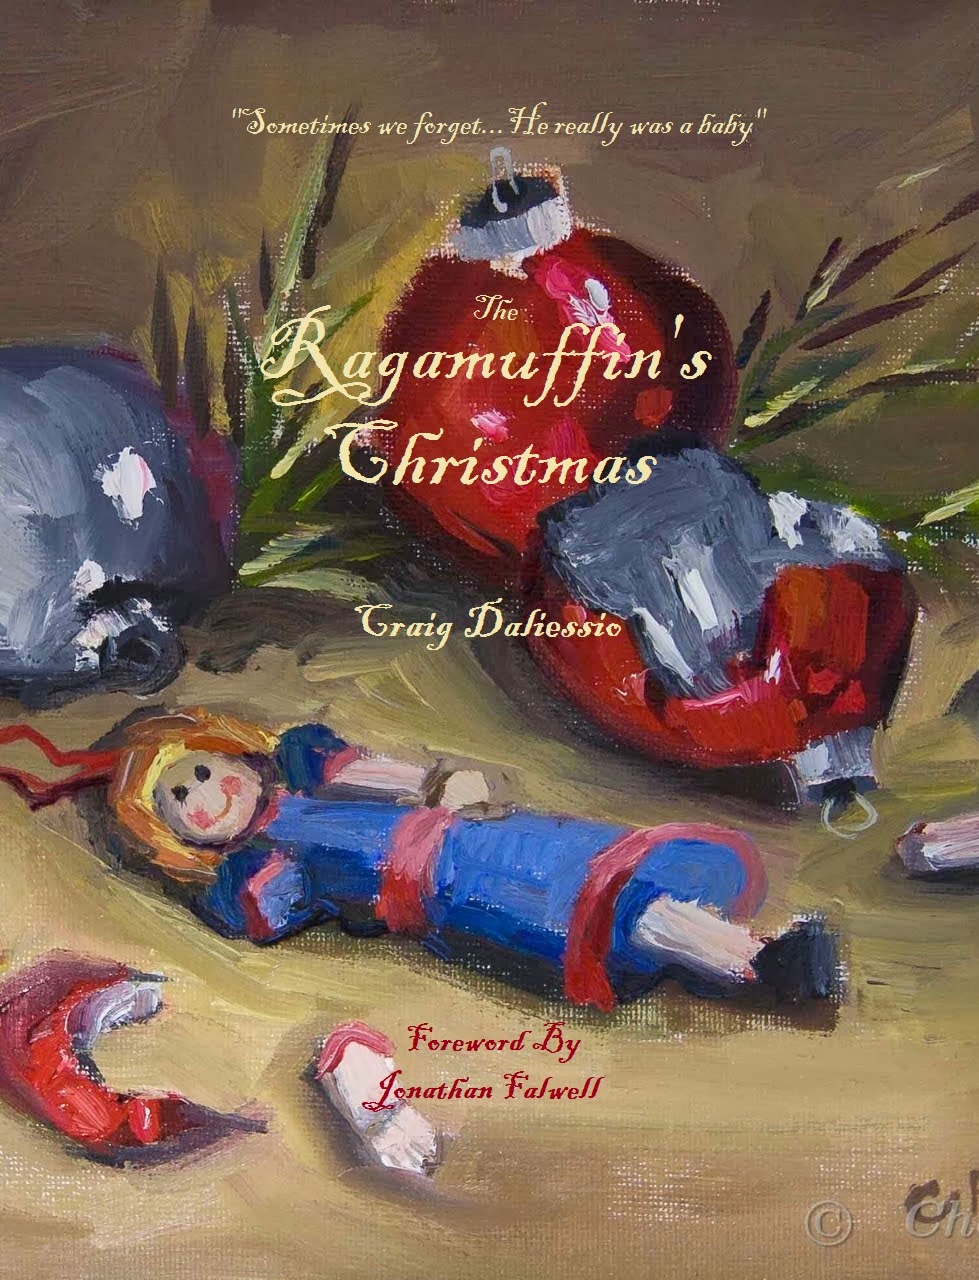 THE RAGAMUFFIN'S CHRISTMAS